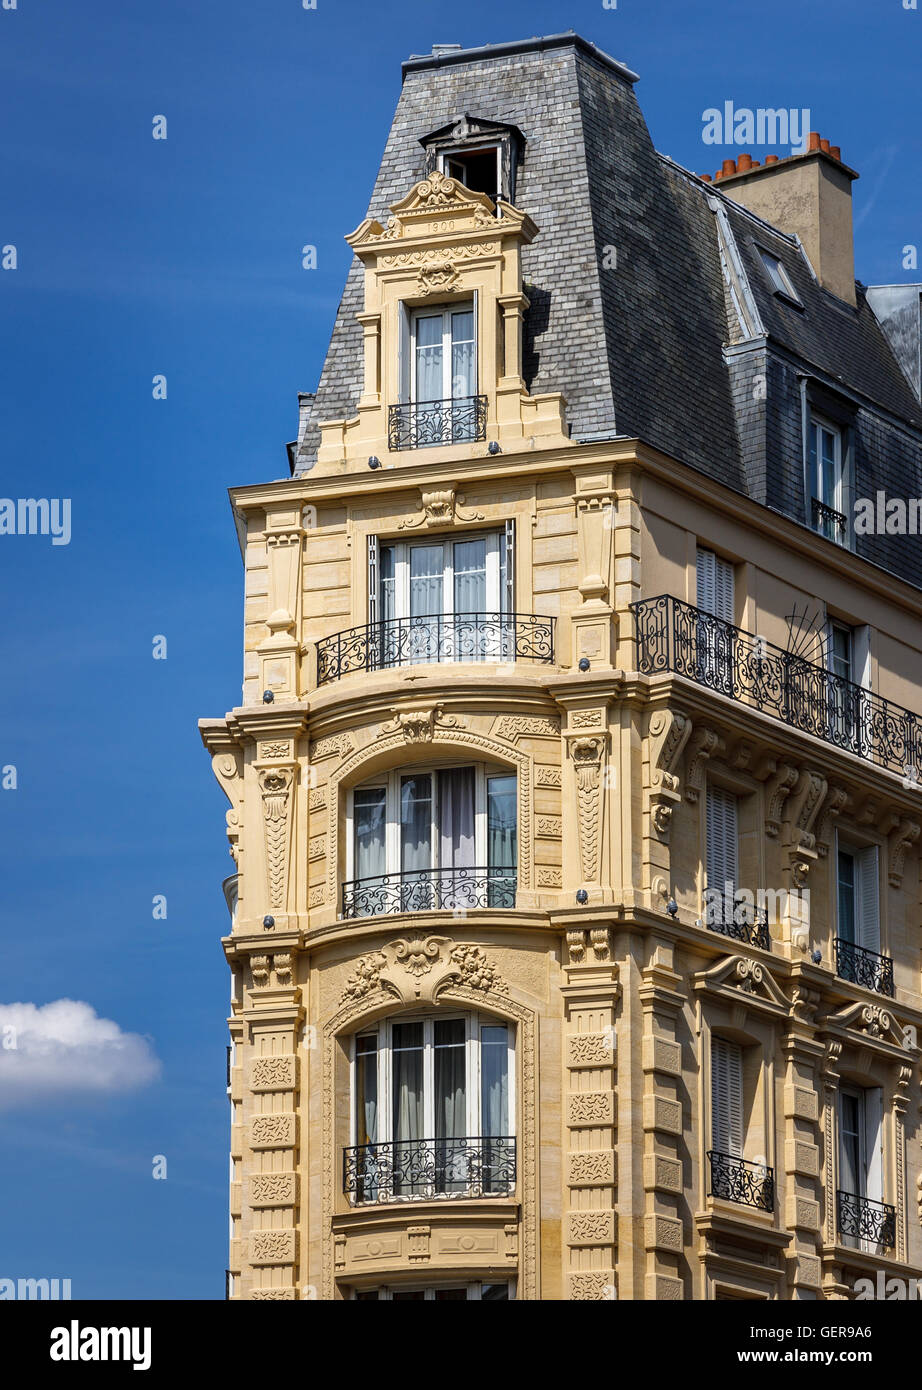 Haussmannian building in the heart of Paris with decorative stonework, wrought iron balconies and a slate mansard roof. France Stock Photo